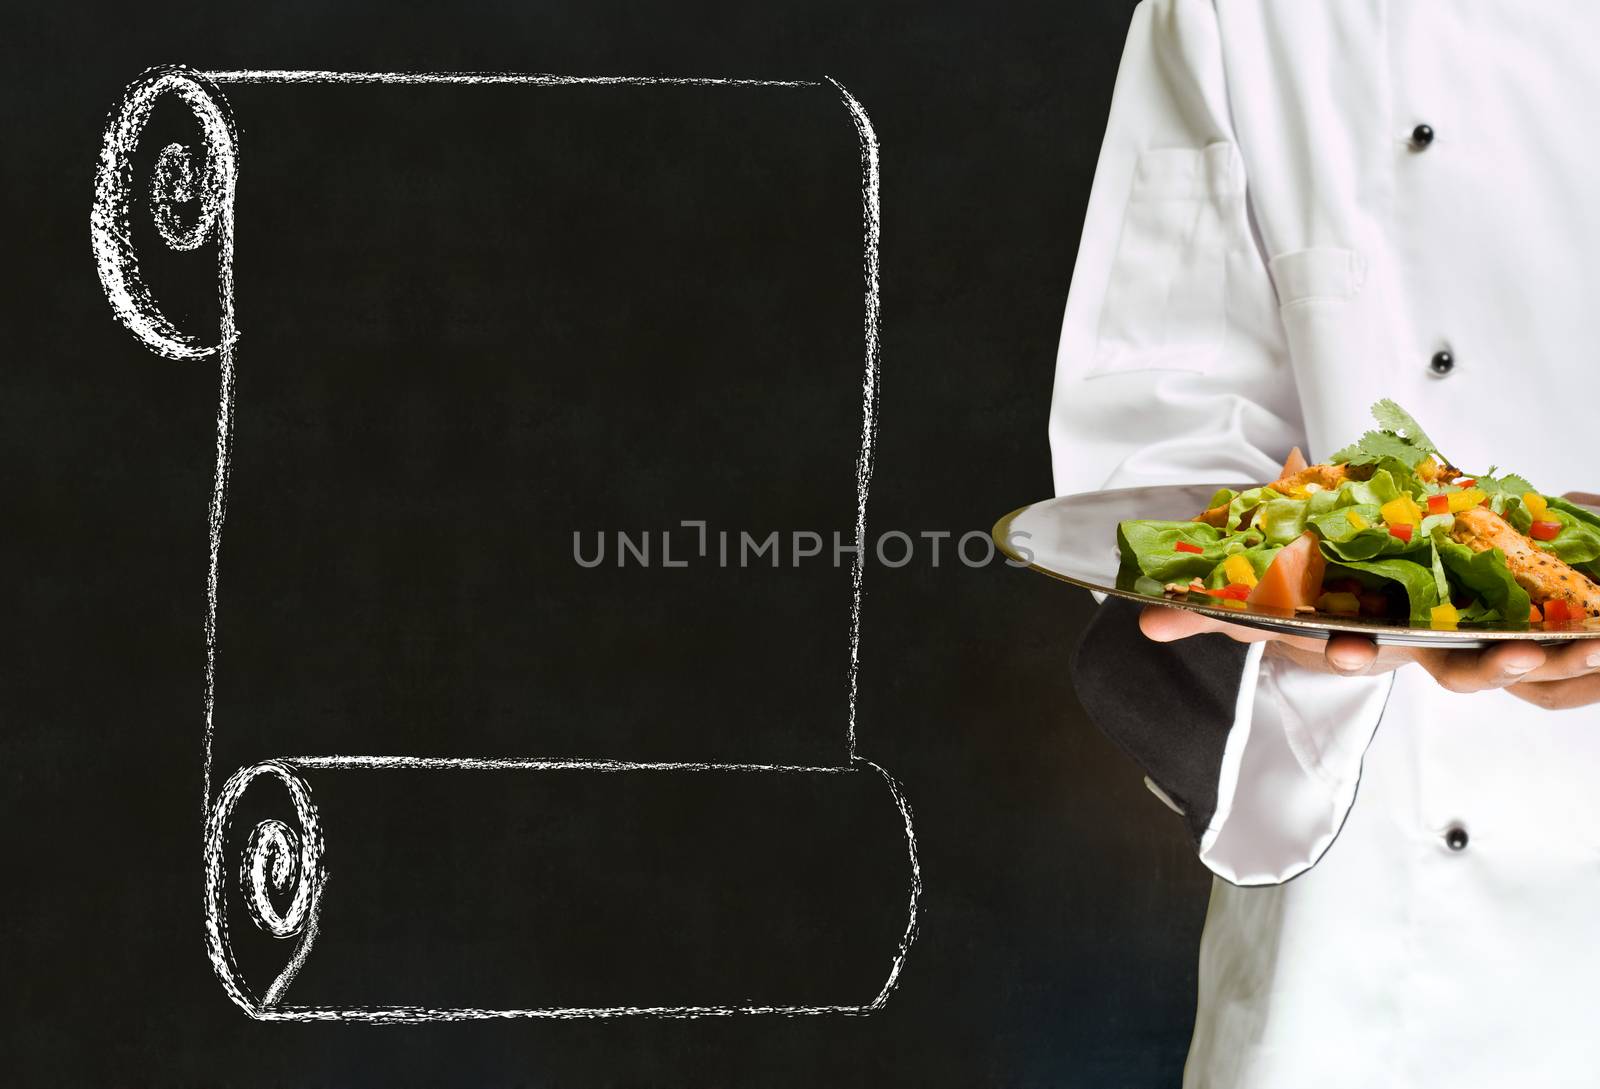 Chef holding health salad dish with chalk scroll on blackboard Background